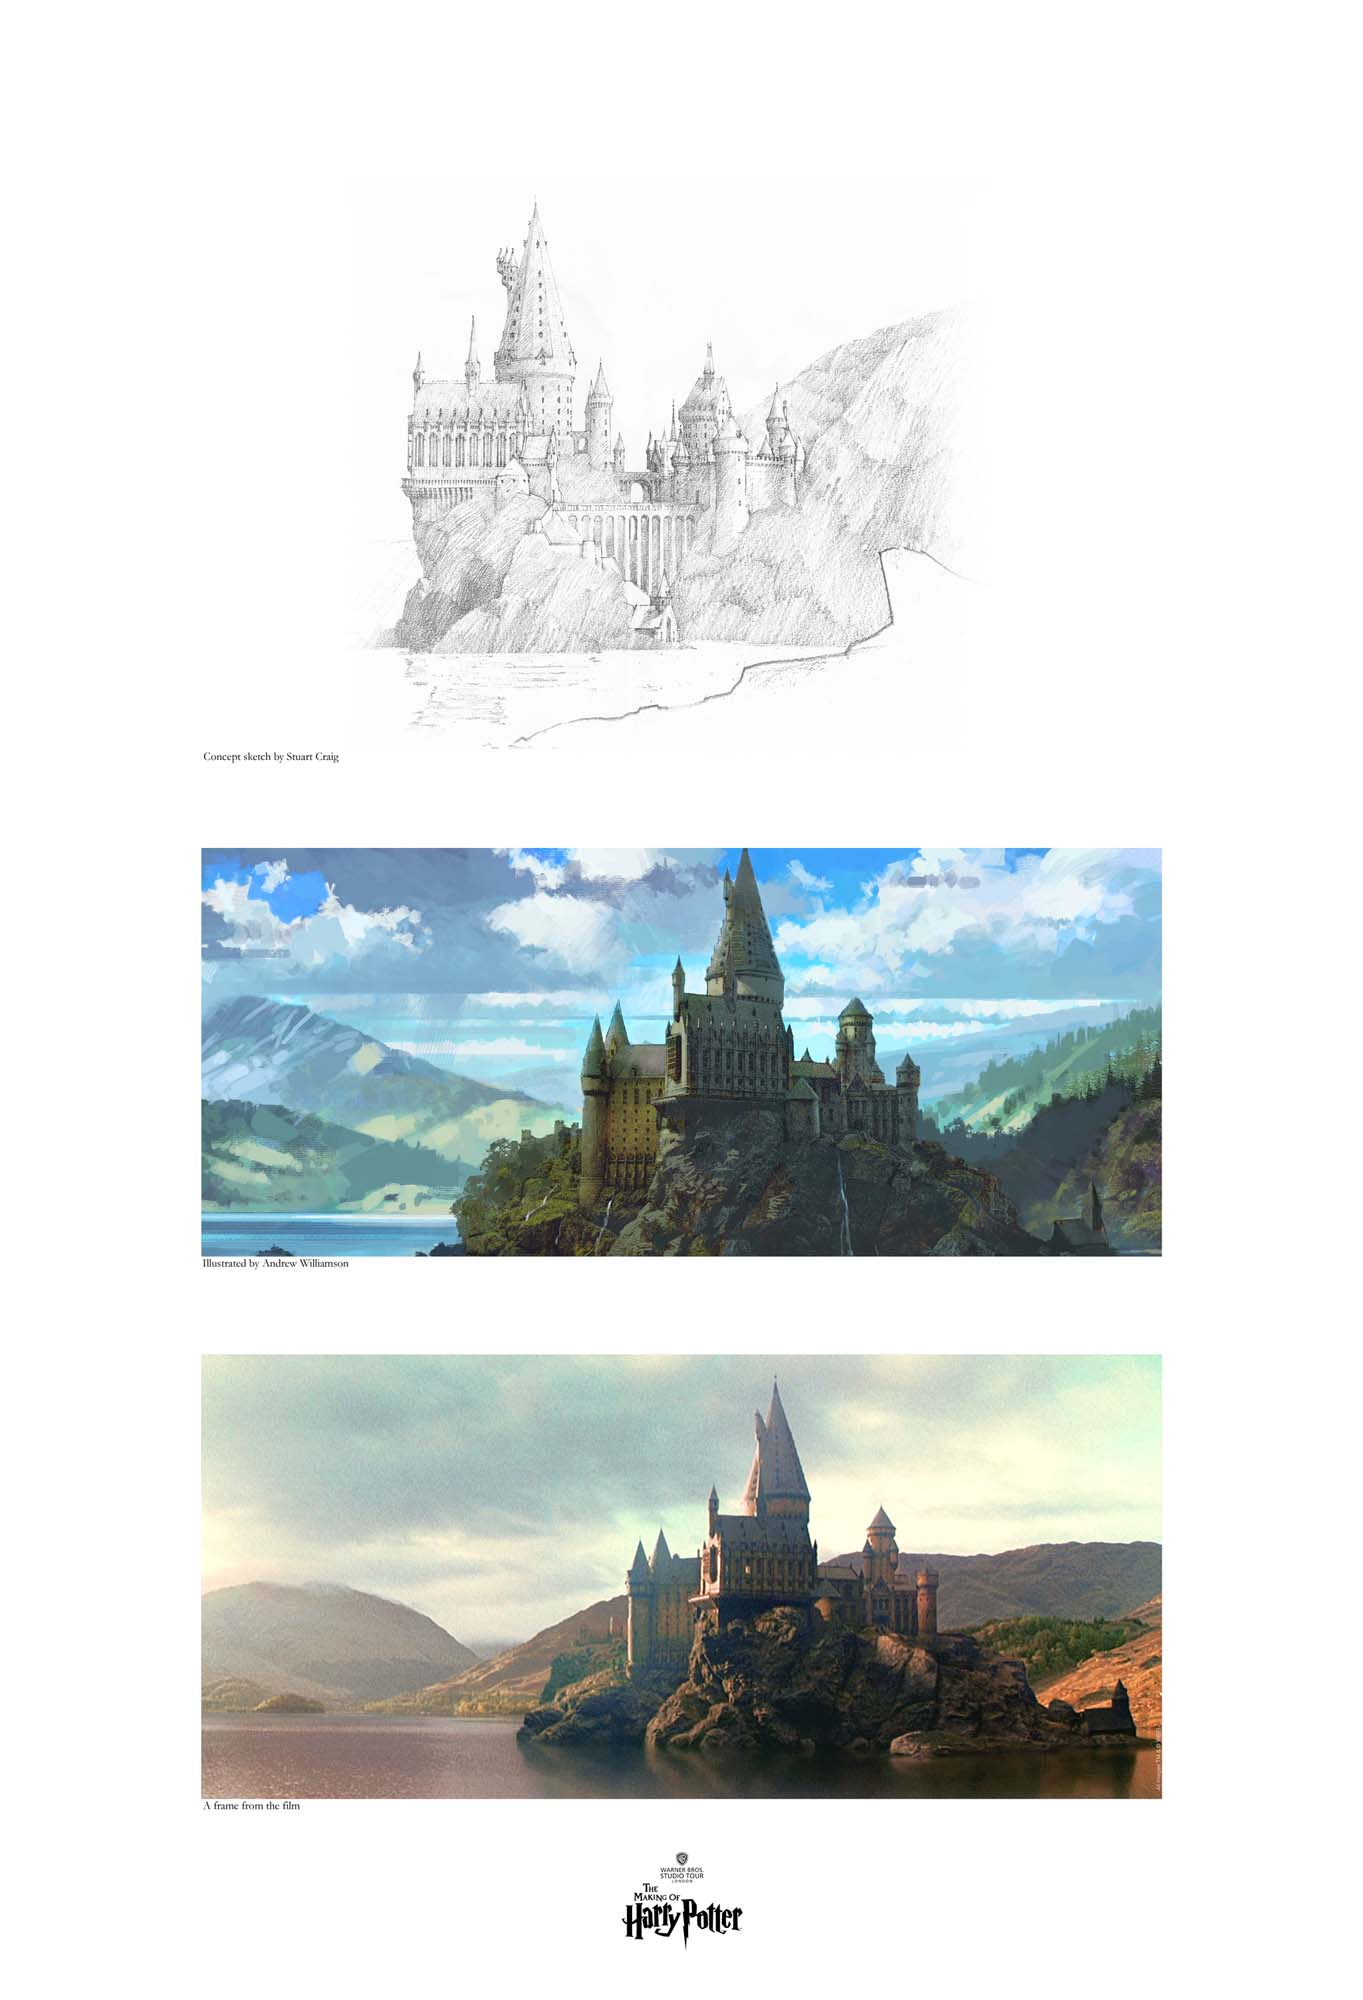 Hogwarts School of Witchcraft and Wizardry, commonly shortened to Hogwarts